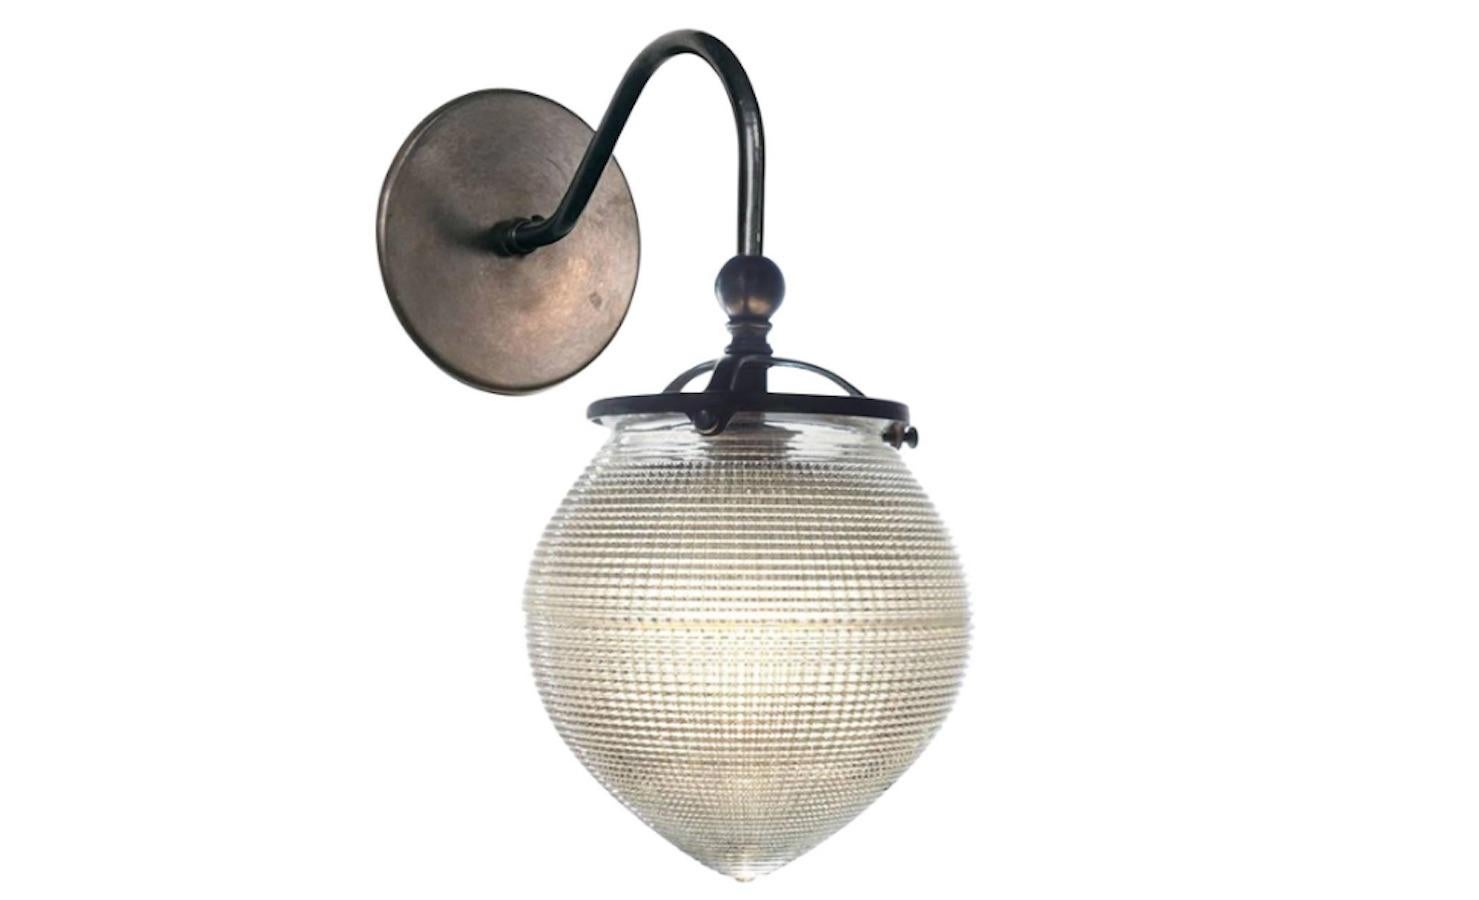 This acorn shaped shade is a favourite. The style was mainly used as lighting for dentists. The shape is very pleasing and makes a perfect simple sconce. The thick prismatic glass gives off beautiful even light.